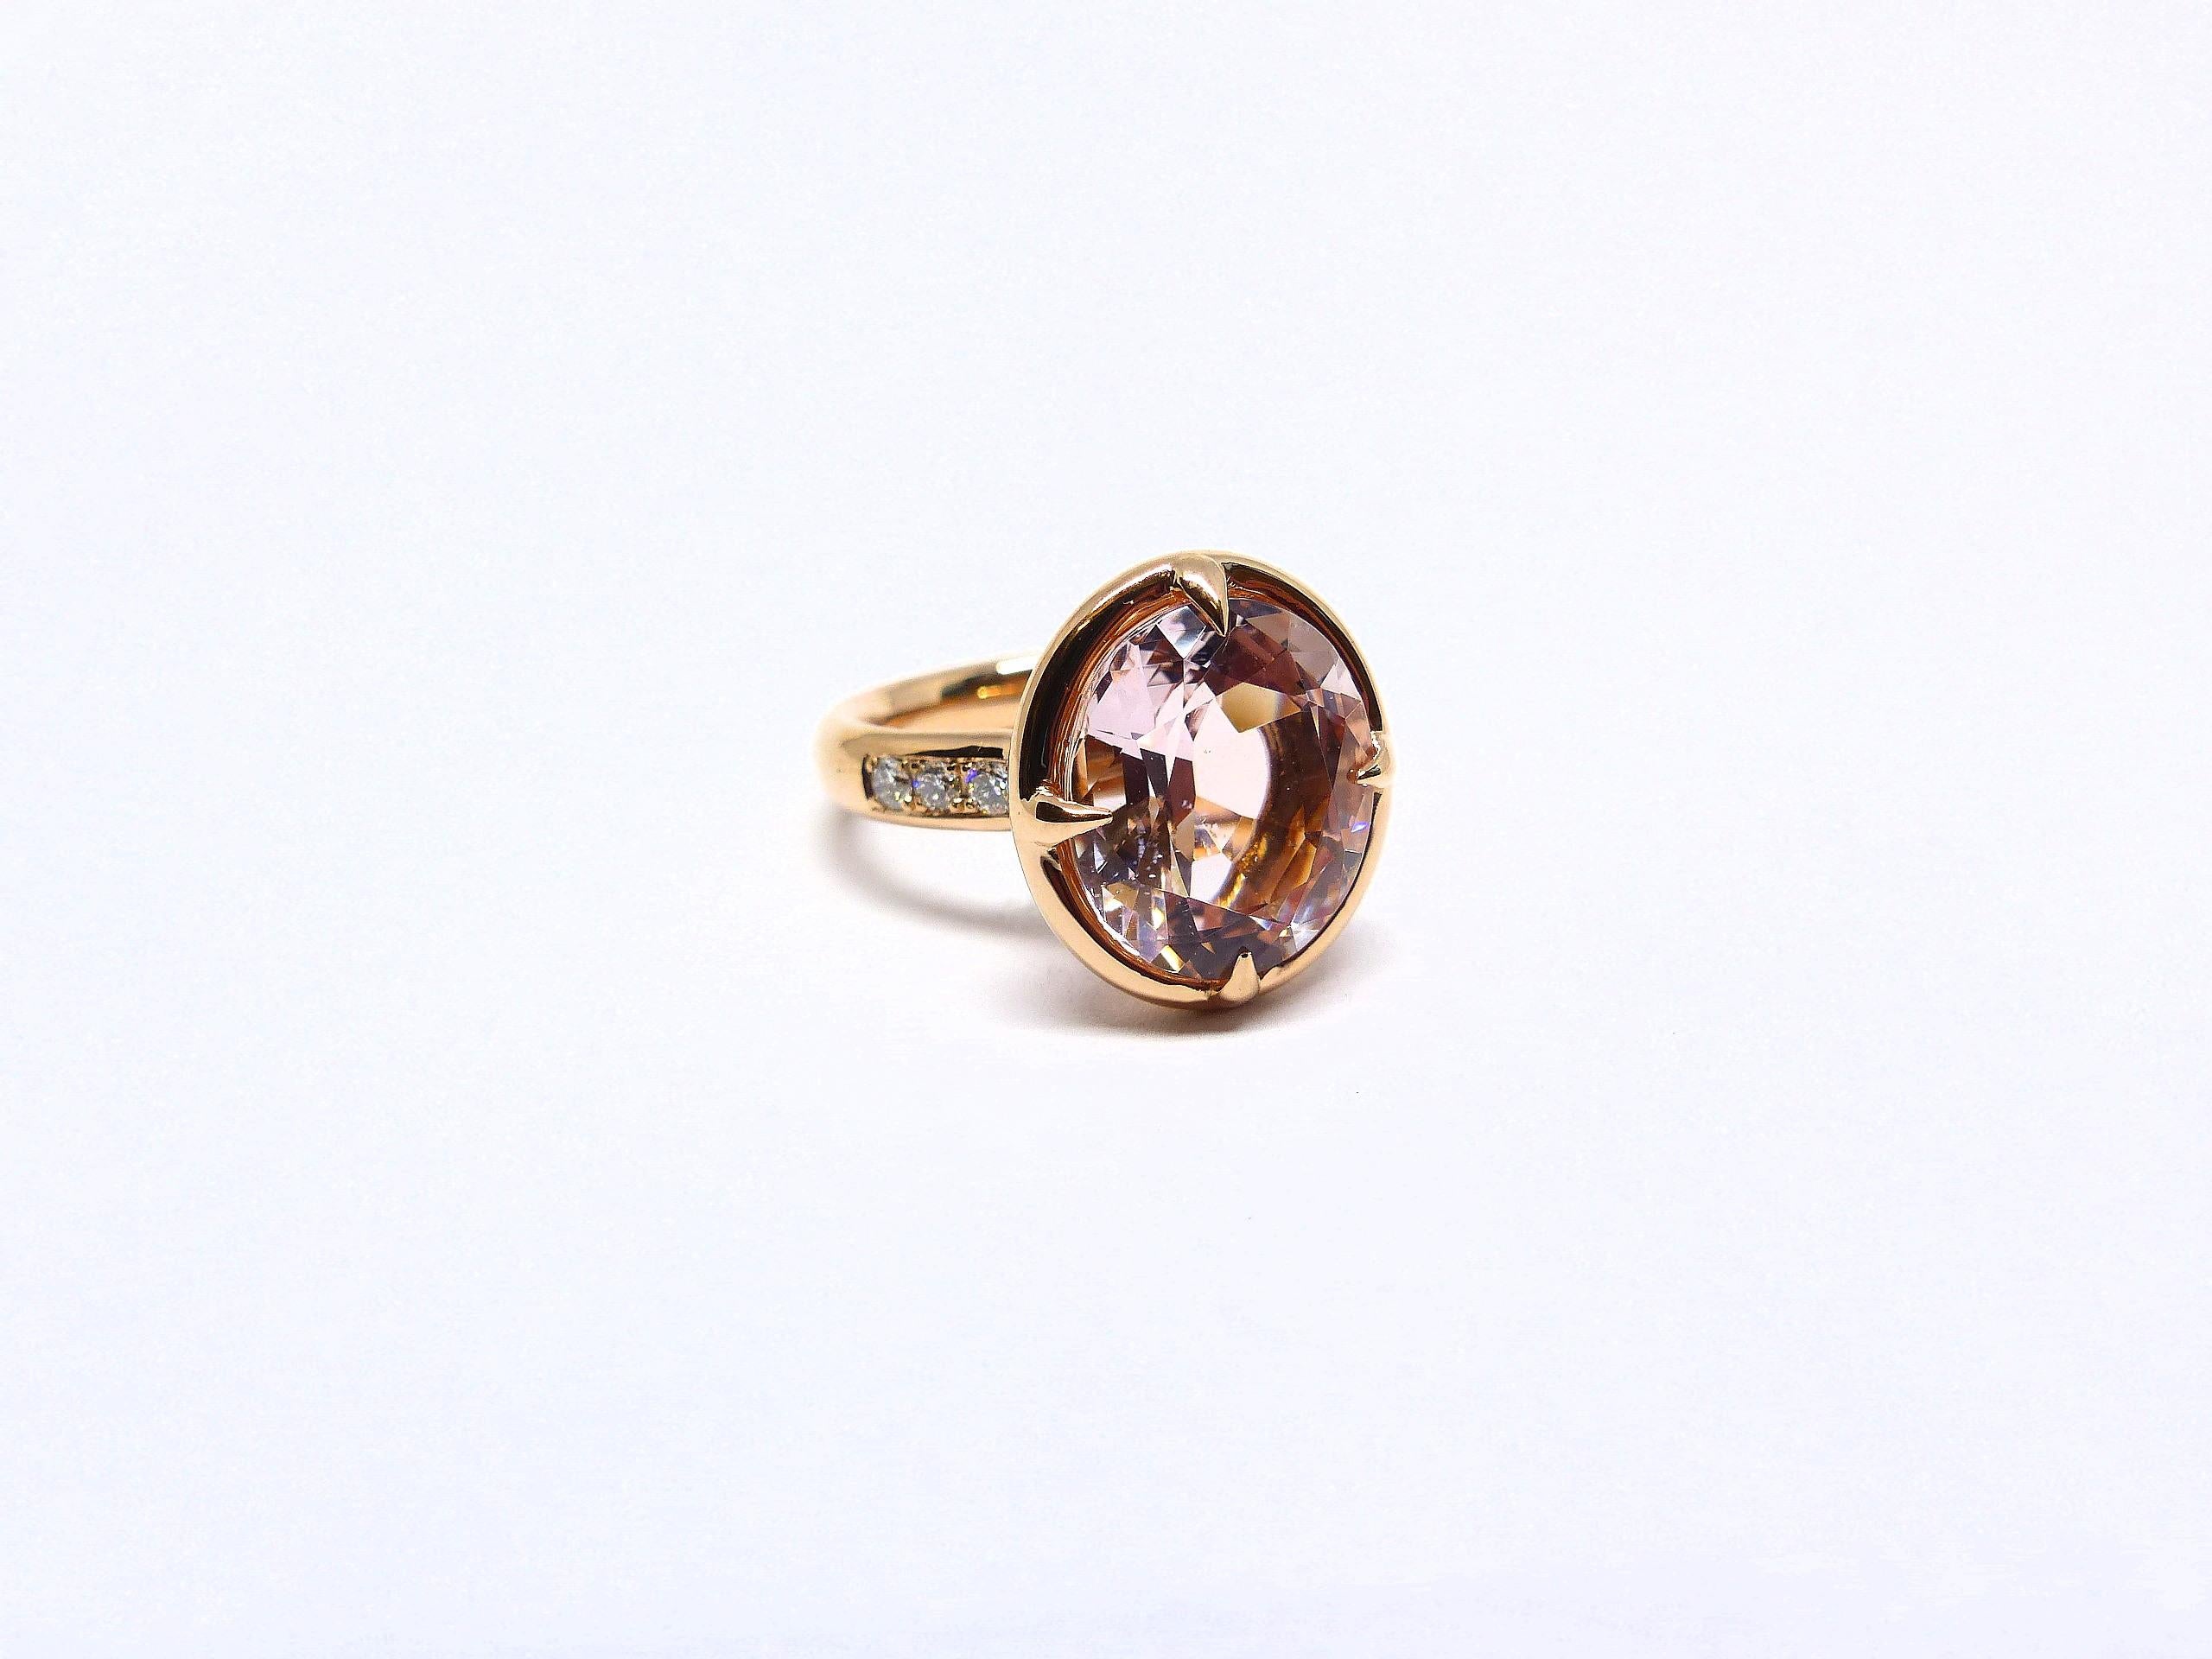 Thomas Leyser is renowned for his contemporary jewellery designs utilizing fine gemstones.

This 18k red gold ring is set with 1x fine Morganite in intensiv pink colour and large facettes (oval, 13x11mm, 5.98 carat) + 10x top-graded Diamonds